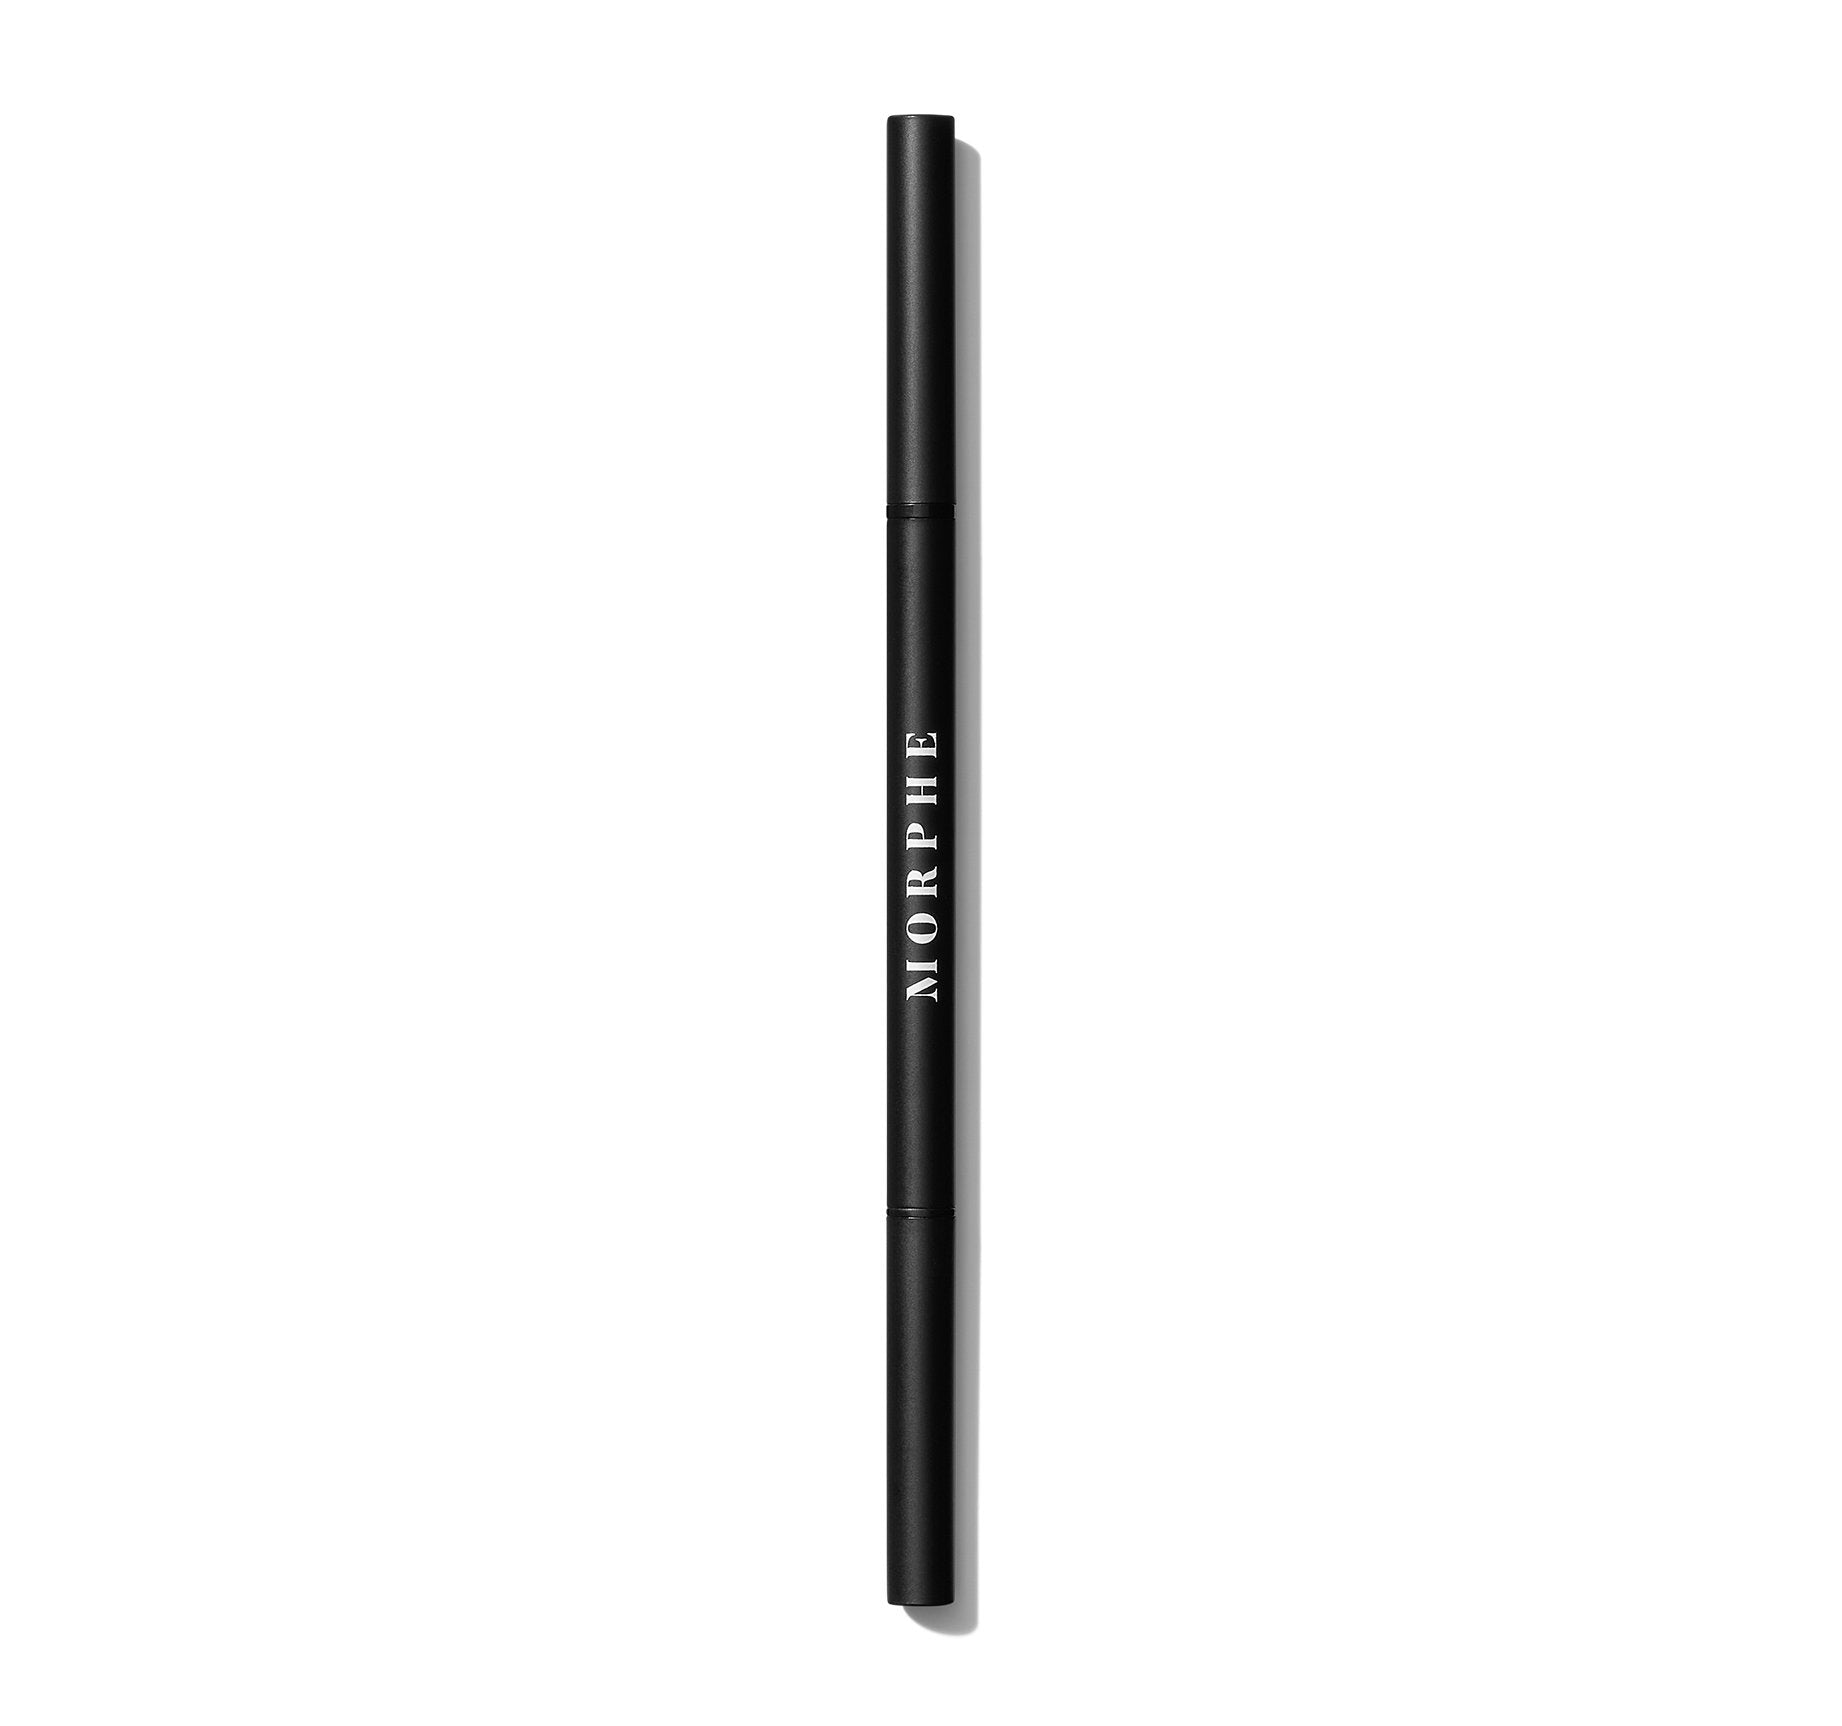 Definer Dual-Ended Brow Pencil & Spoolie - Cold Brew - Image 9